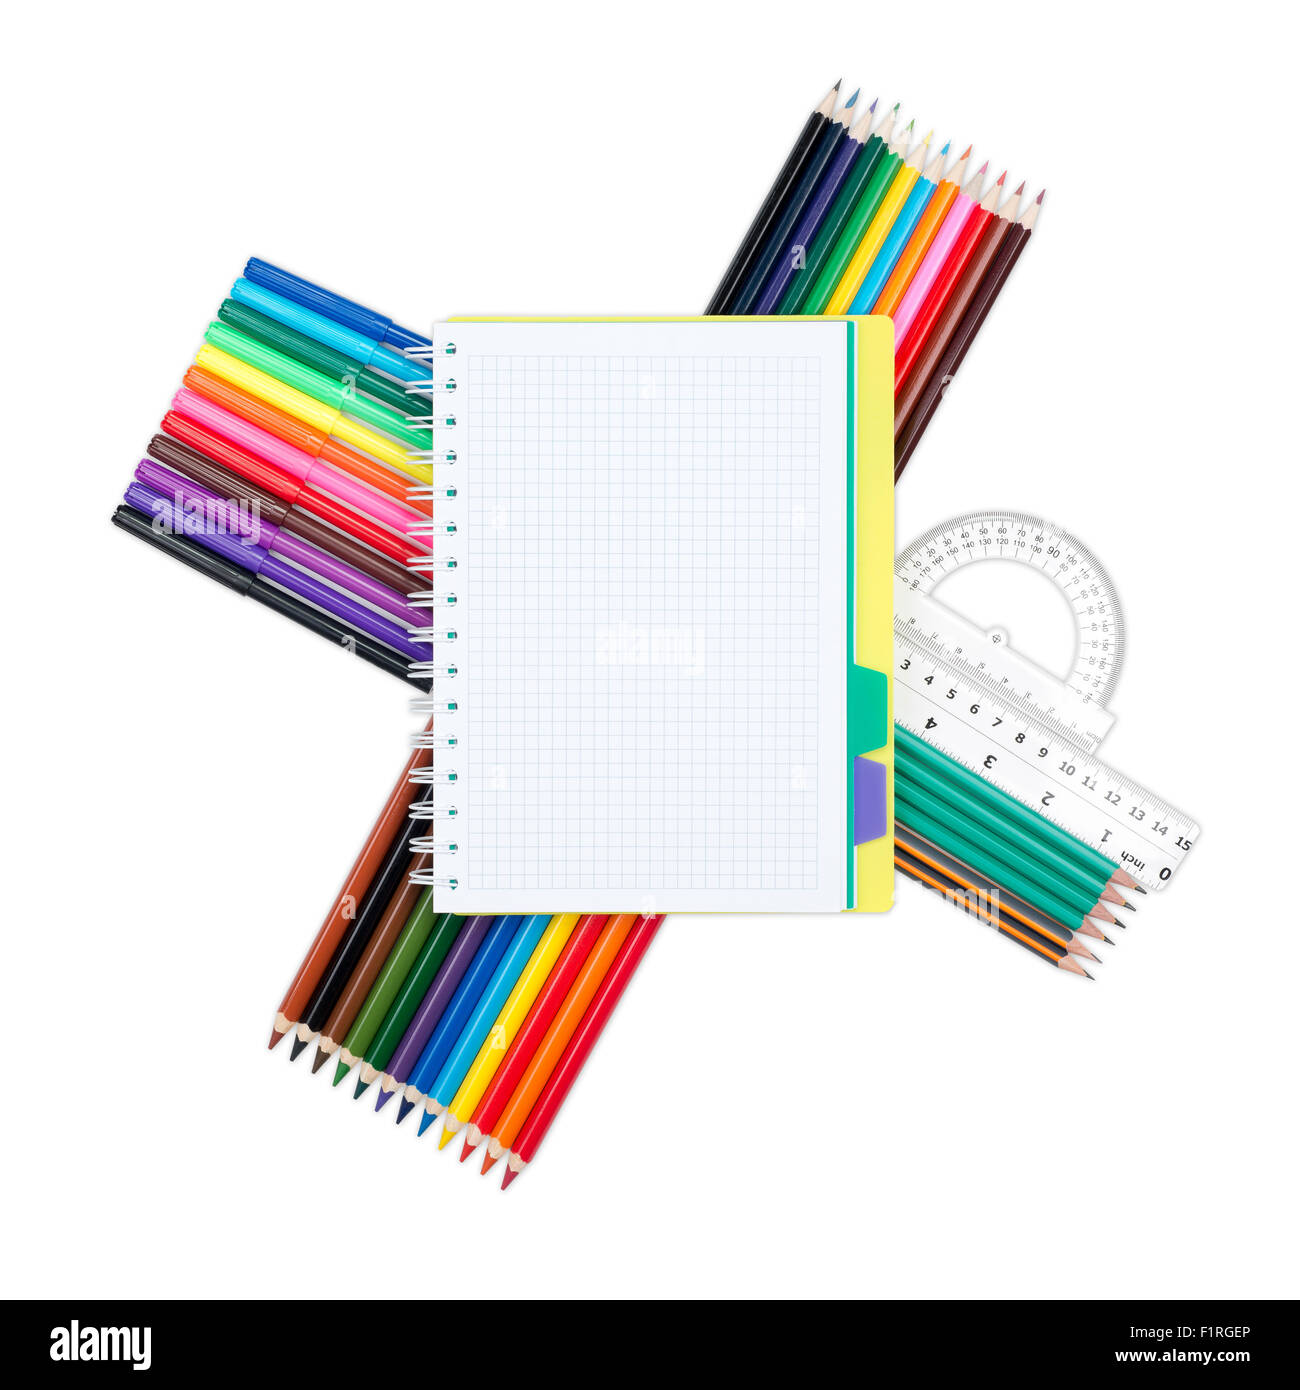 Back to school. Supplies on white background. Stock Photo